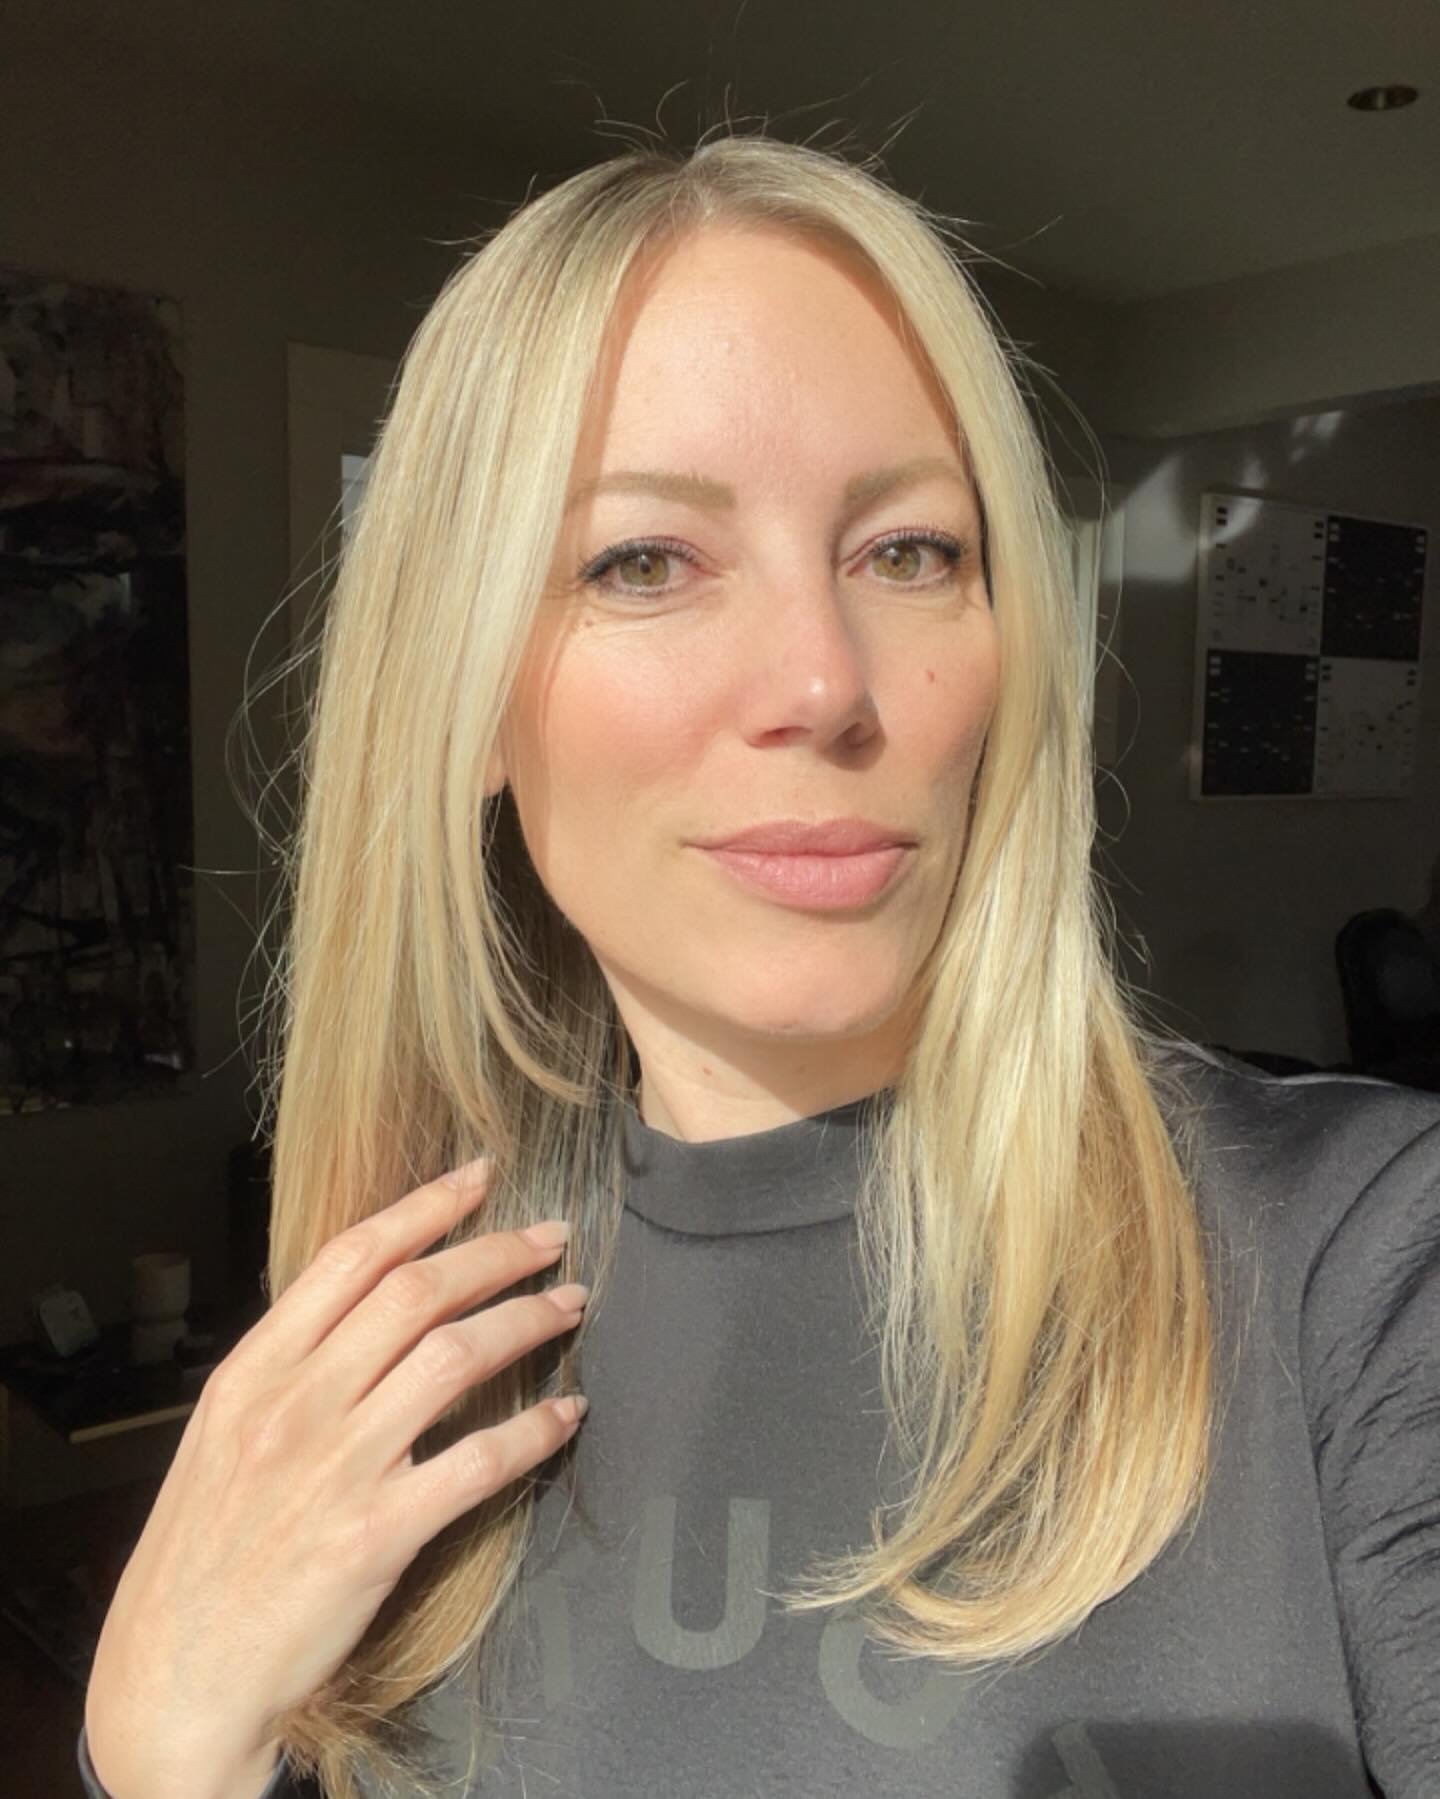 Fresh Hair, Do Care! Loving this blonde refresh from Bailee @baileethehairchemist @xotreatmentroom my hair is feeling really healthy and is the perfect blonde! Less highlights but brighter over all! Has my first facial in a while too and my skin is f